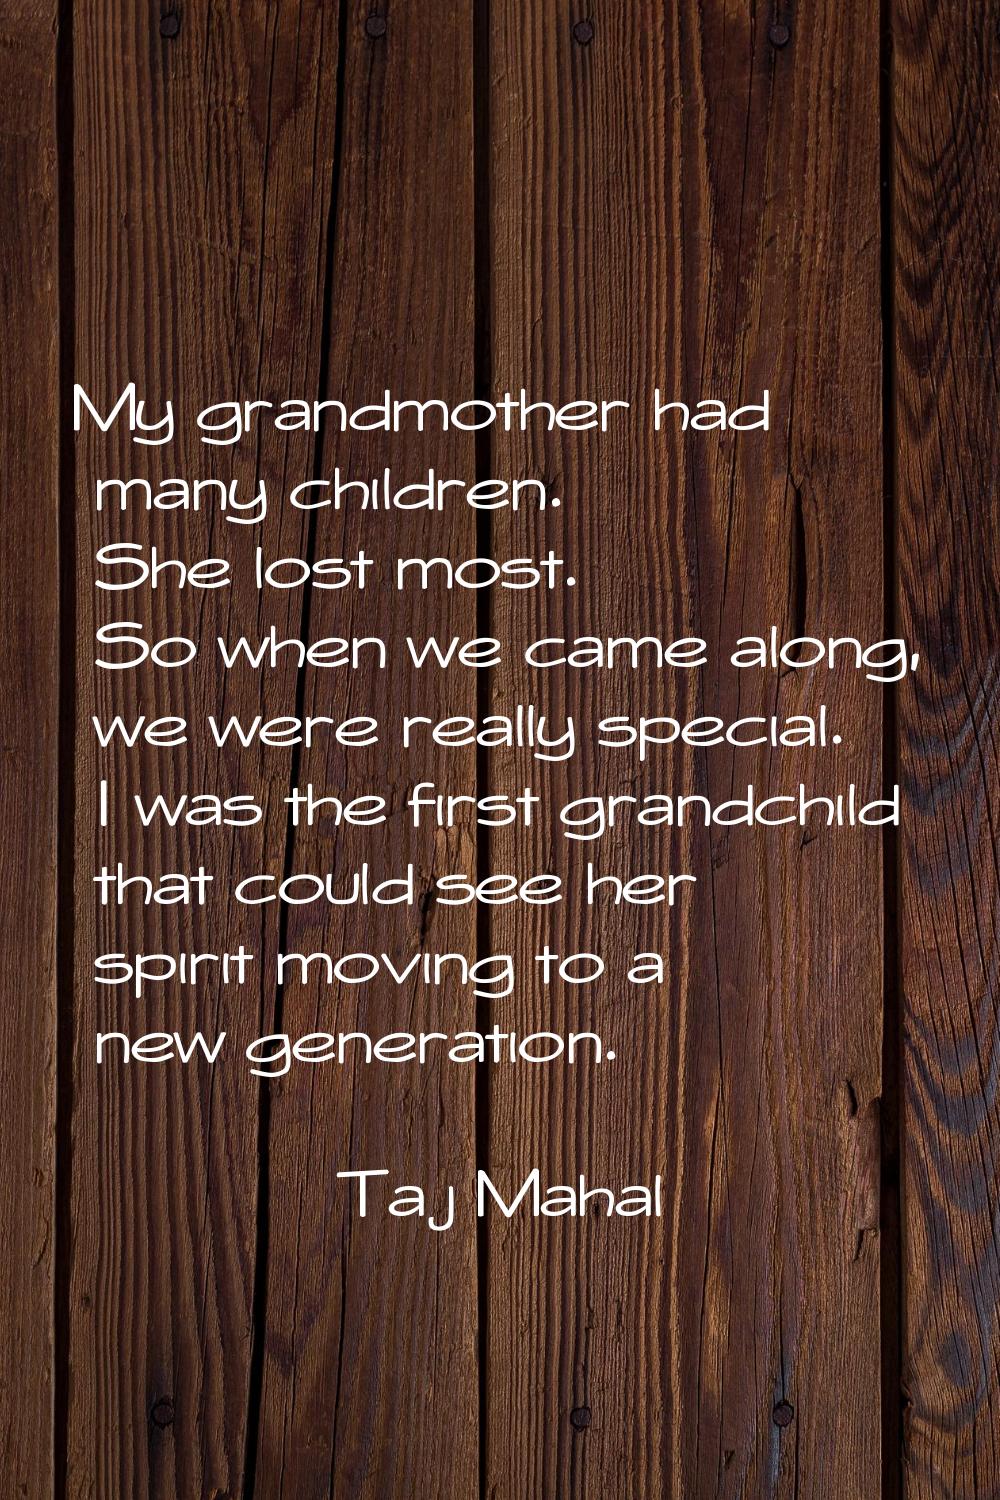 My grandmother had many children. She lost most. So when we came along, we were really special. I w